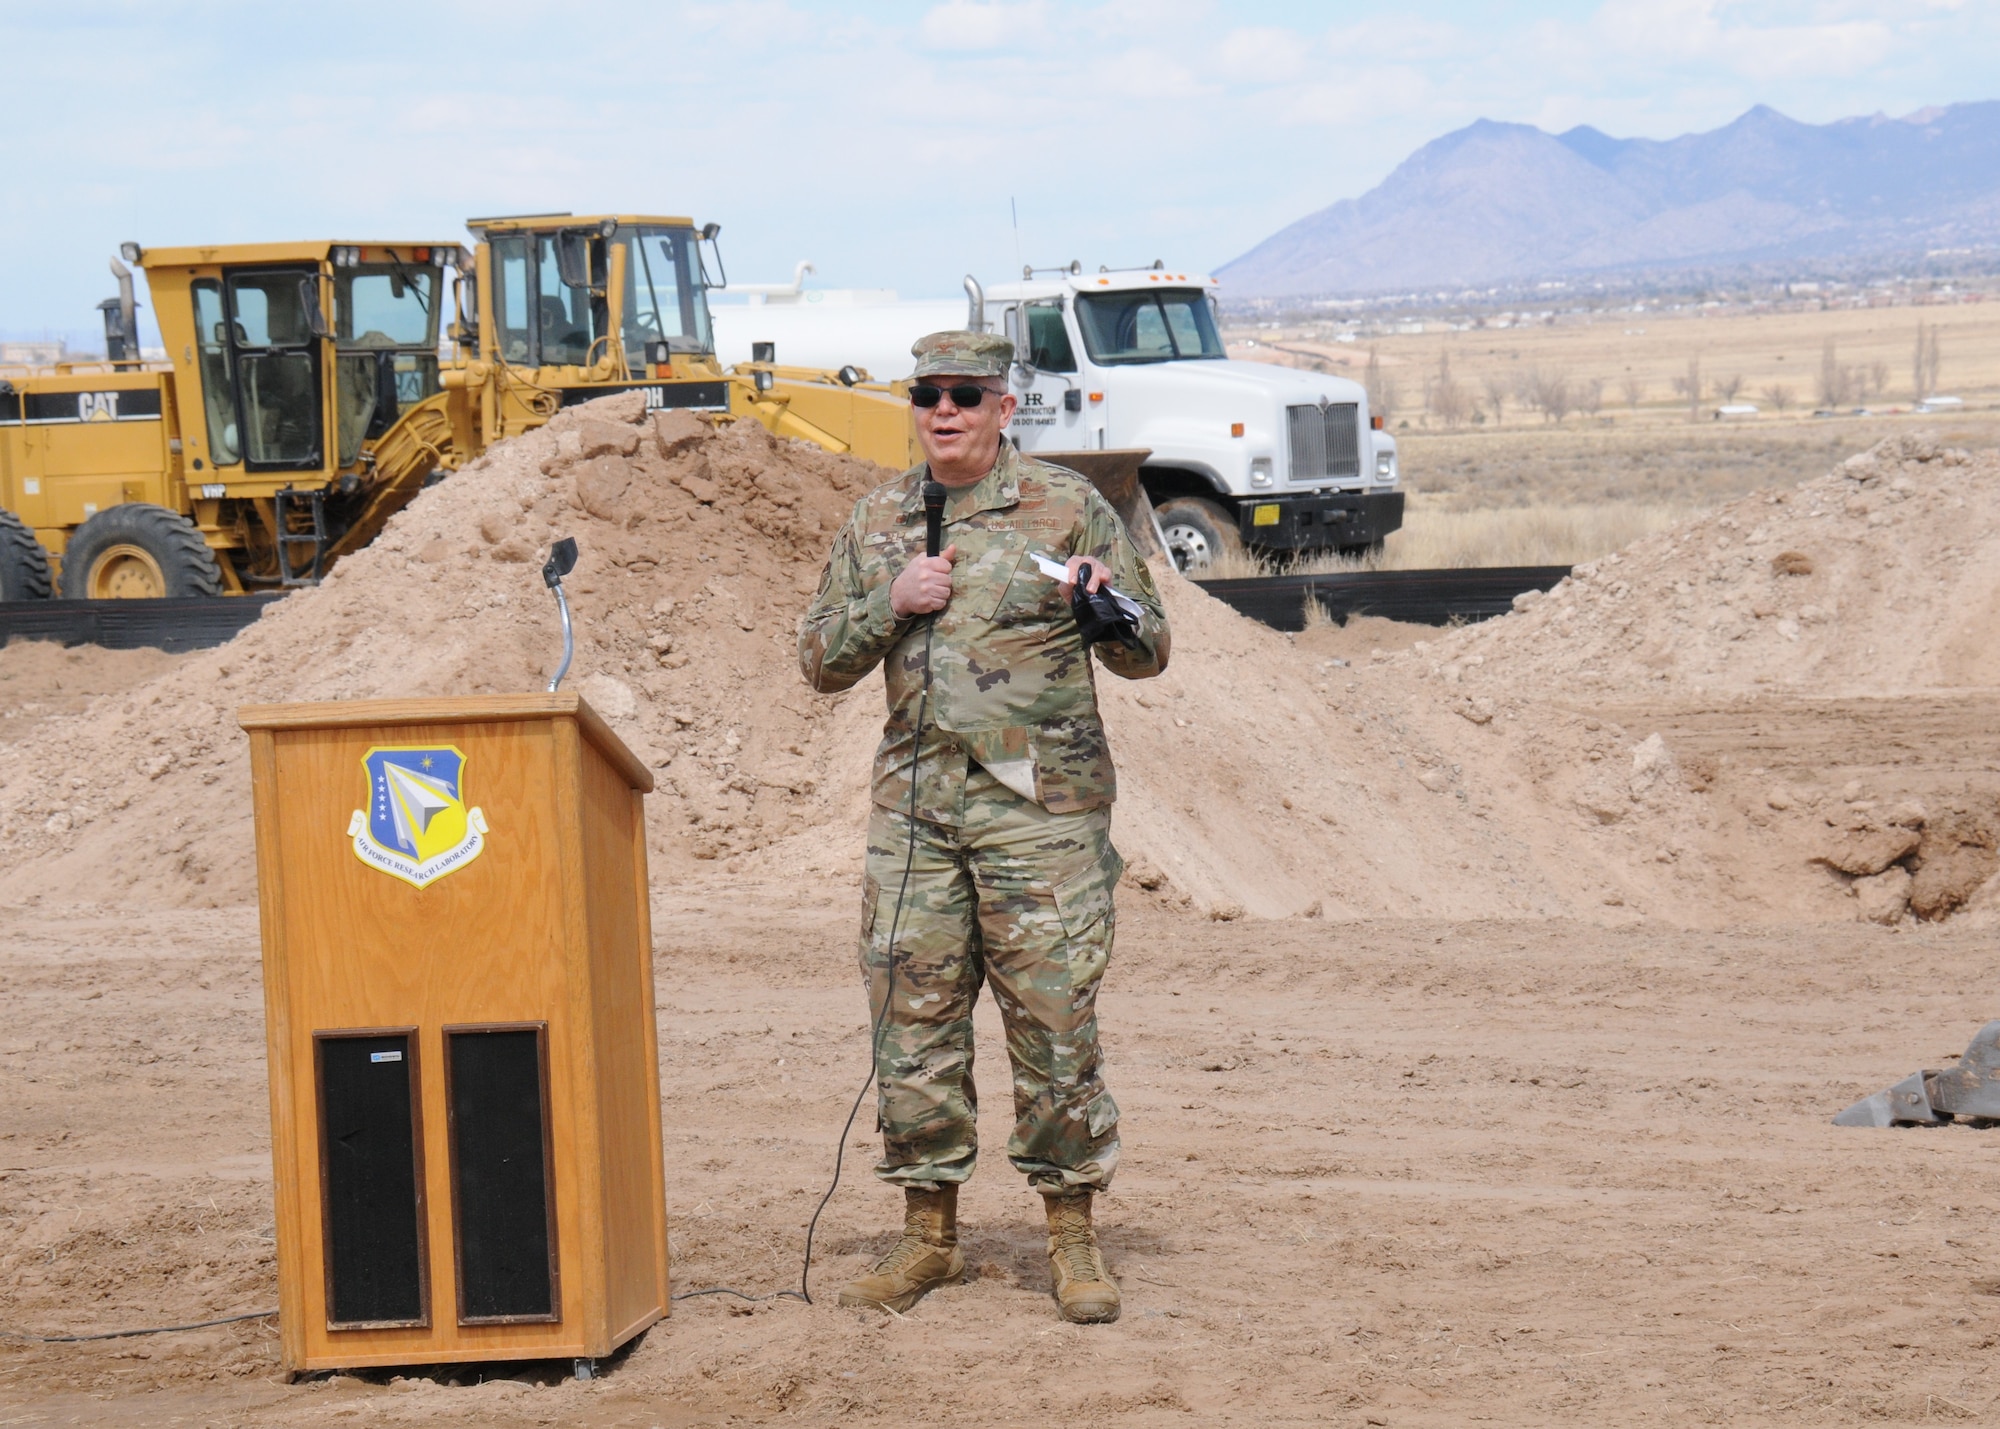 Col. Eric Felt, director of the Air Force Research Laboratory Space Vehicles Directorate, discusses the importance of the directorate’s newest construction project, the Skywave Technology Laboratory, at a groundbreaking ceremony March 16 at Kirtland AFB, N.M. (U.S. Air Force photo/John Cochran)